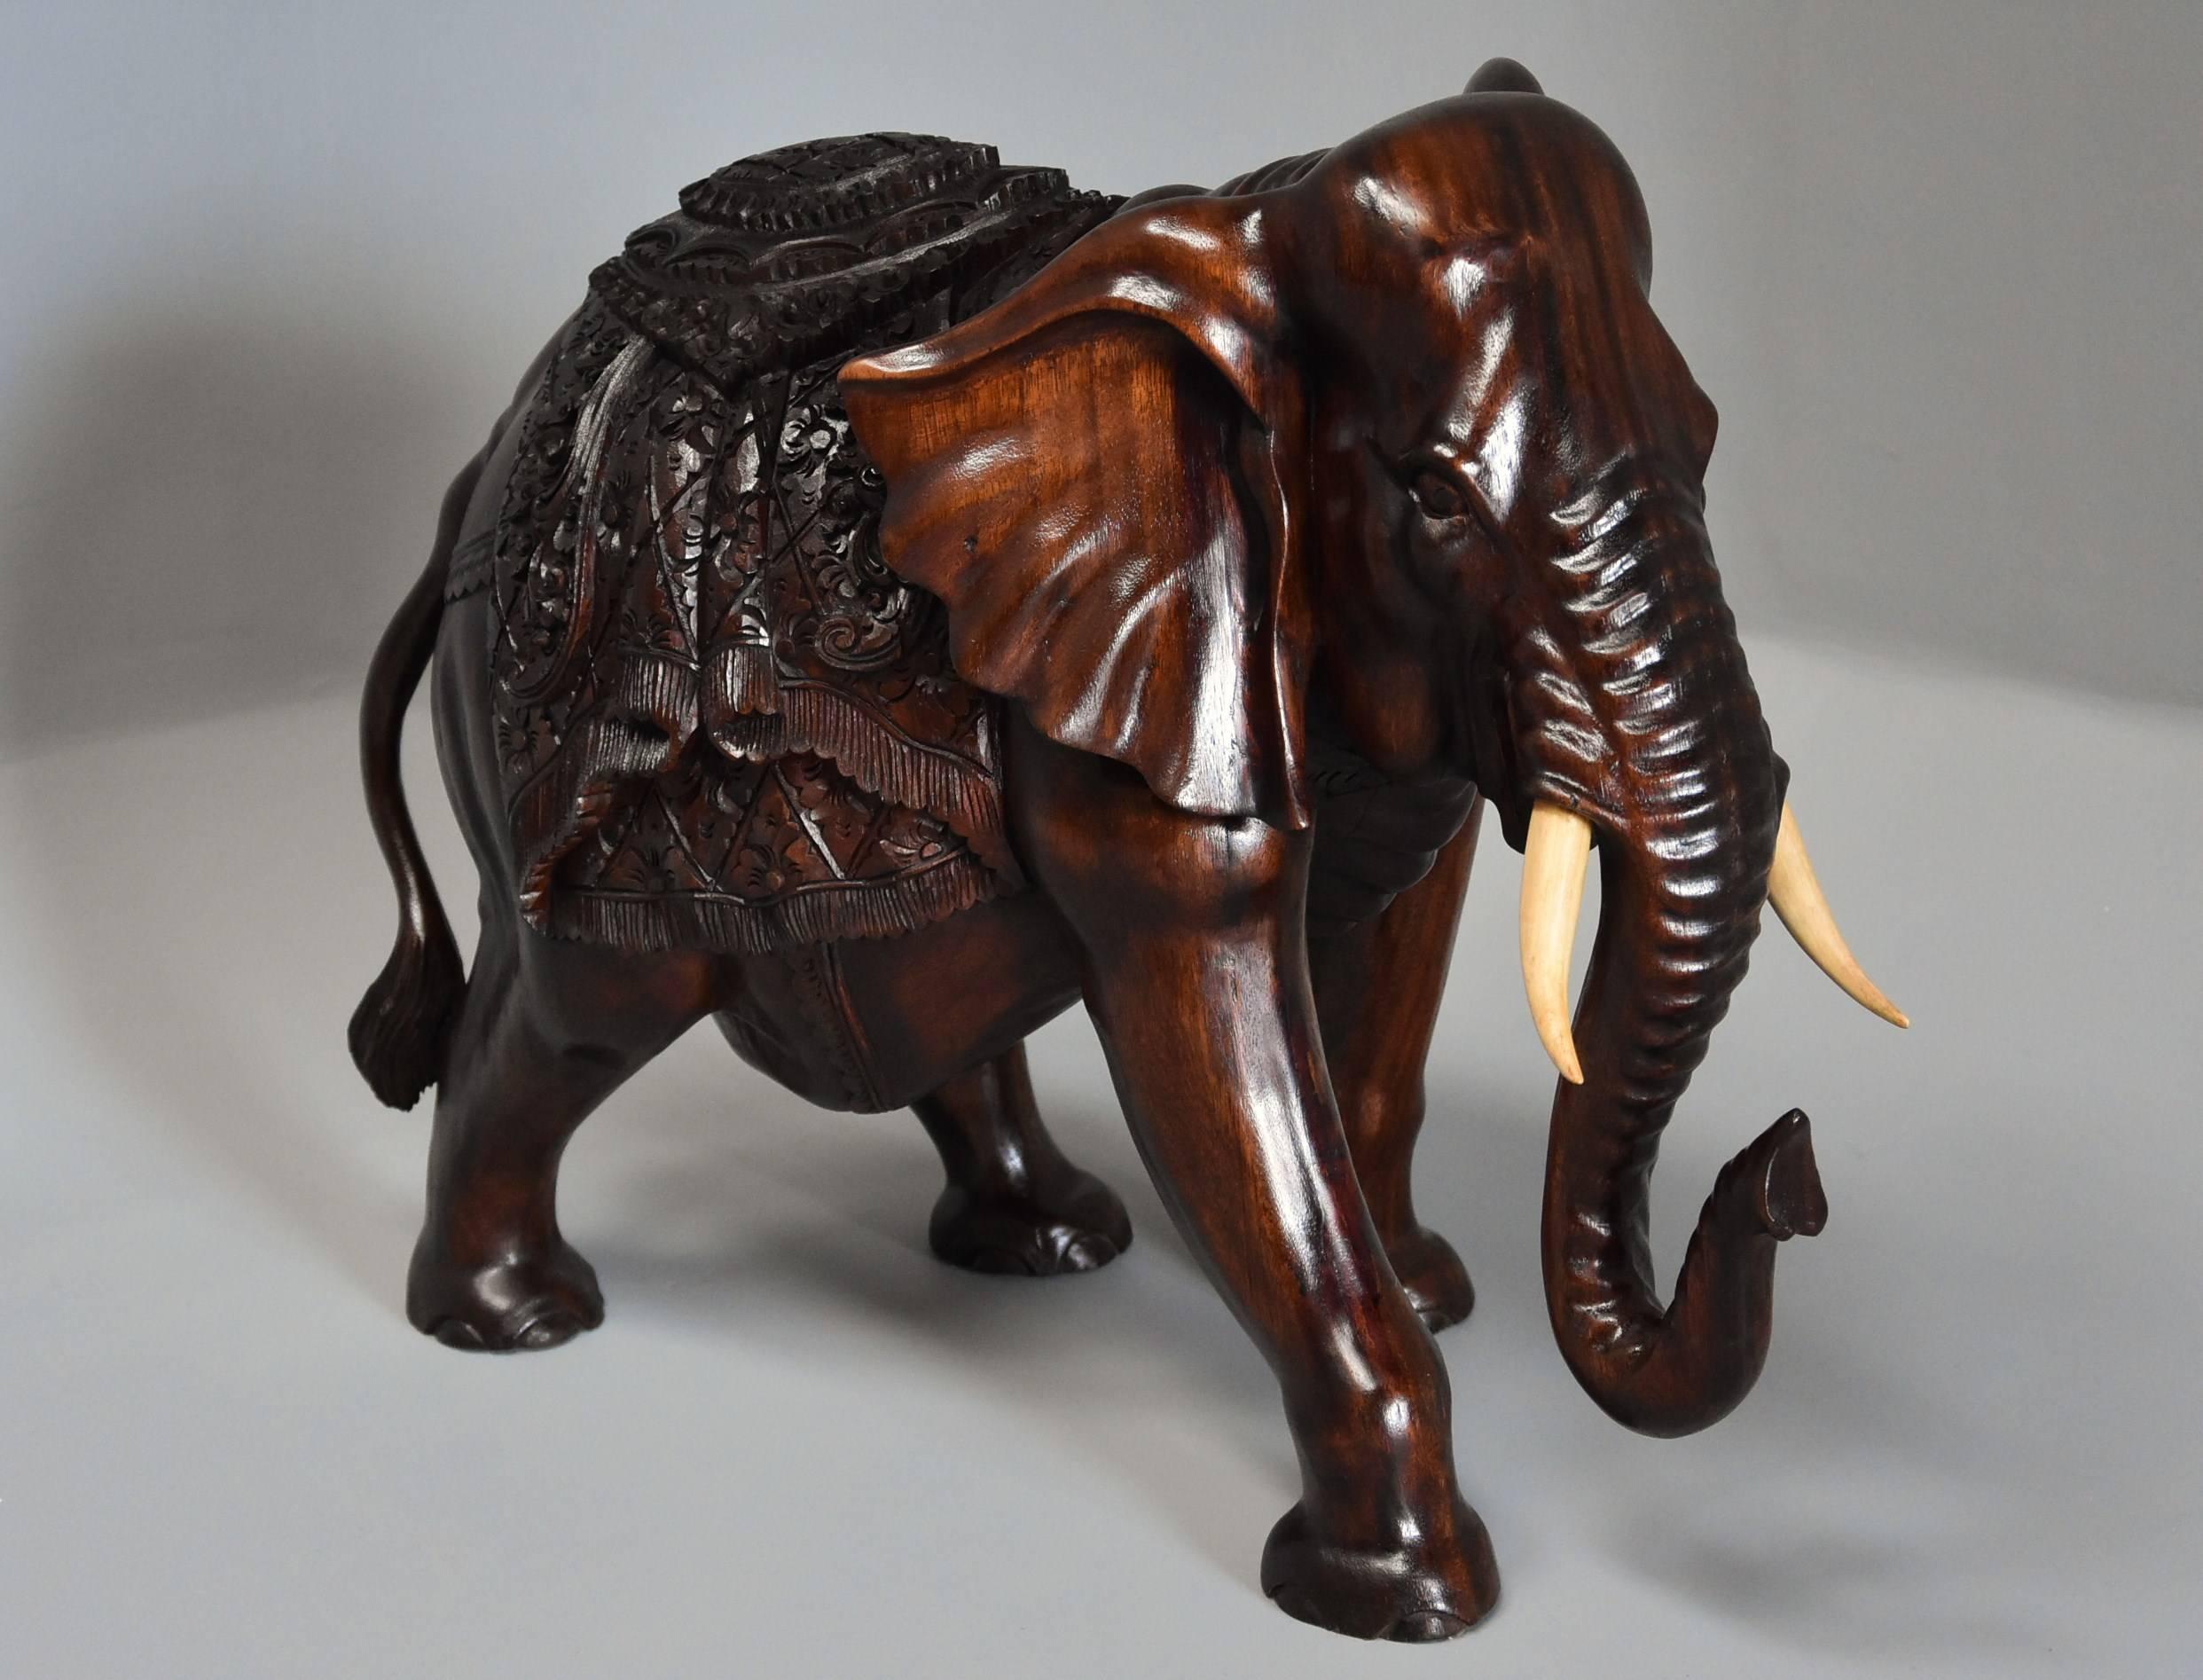 A highly decorative carved hardwood elephant.

This superbly carved elephant figure has wooden tusks and a decorative rug on his back.

This figure is in excellent condition and can go straight into a home.